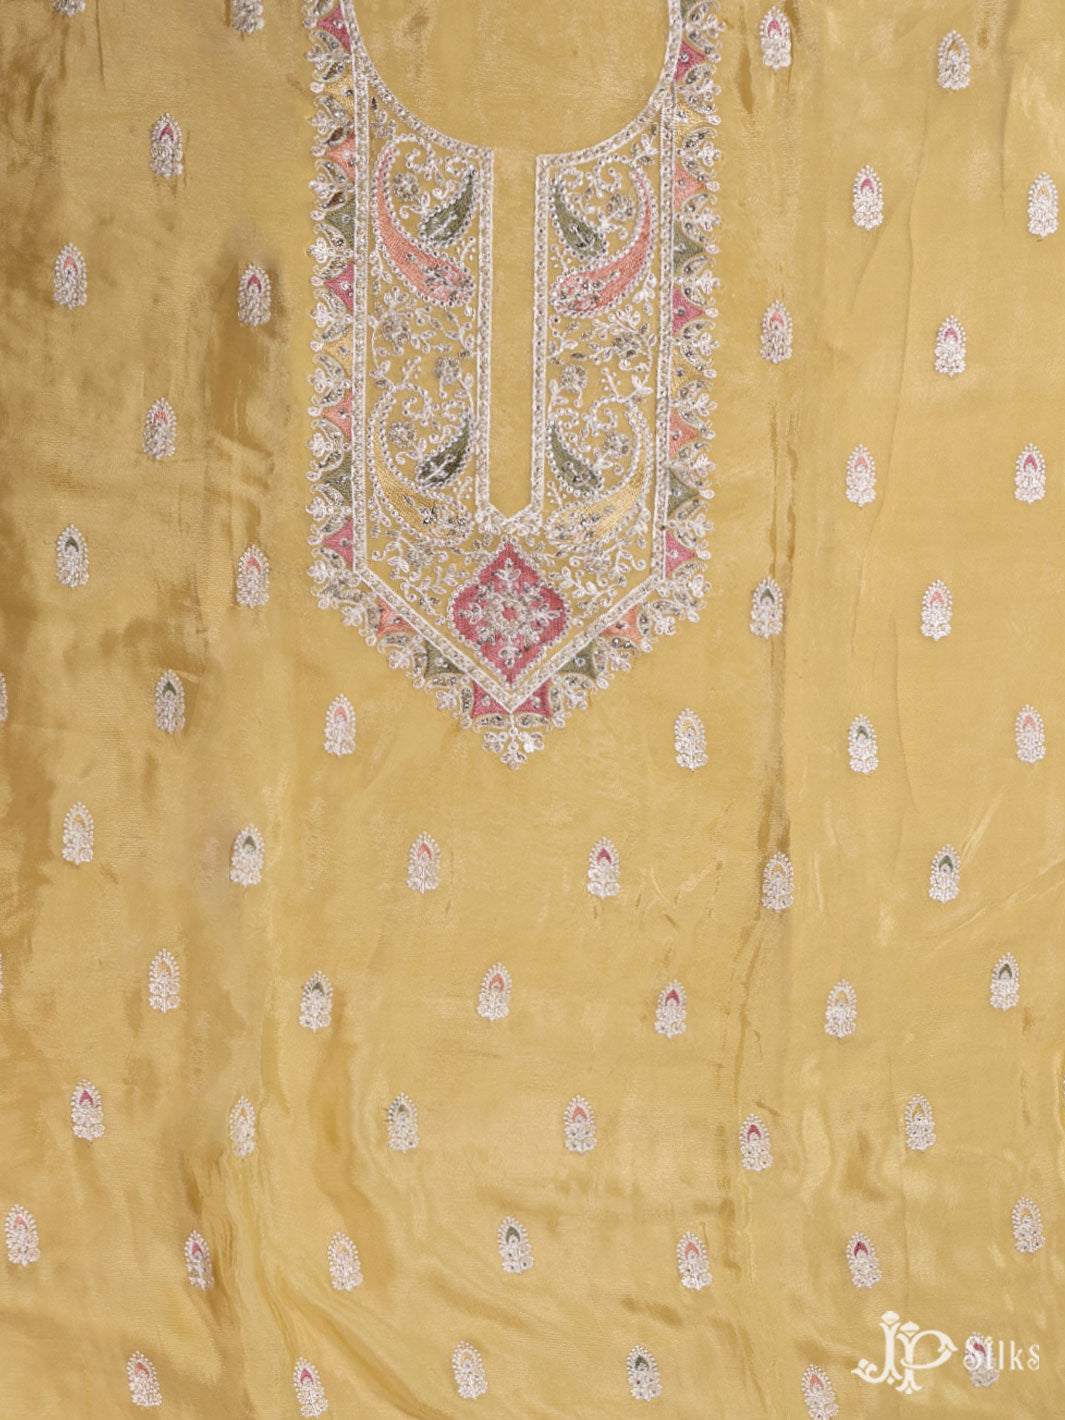 Yellow Chiffon Unstiched Chudidhar Material - E3548 - View 6